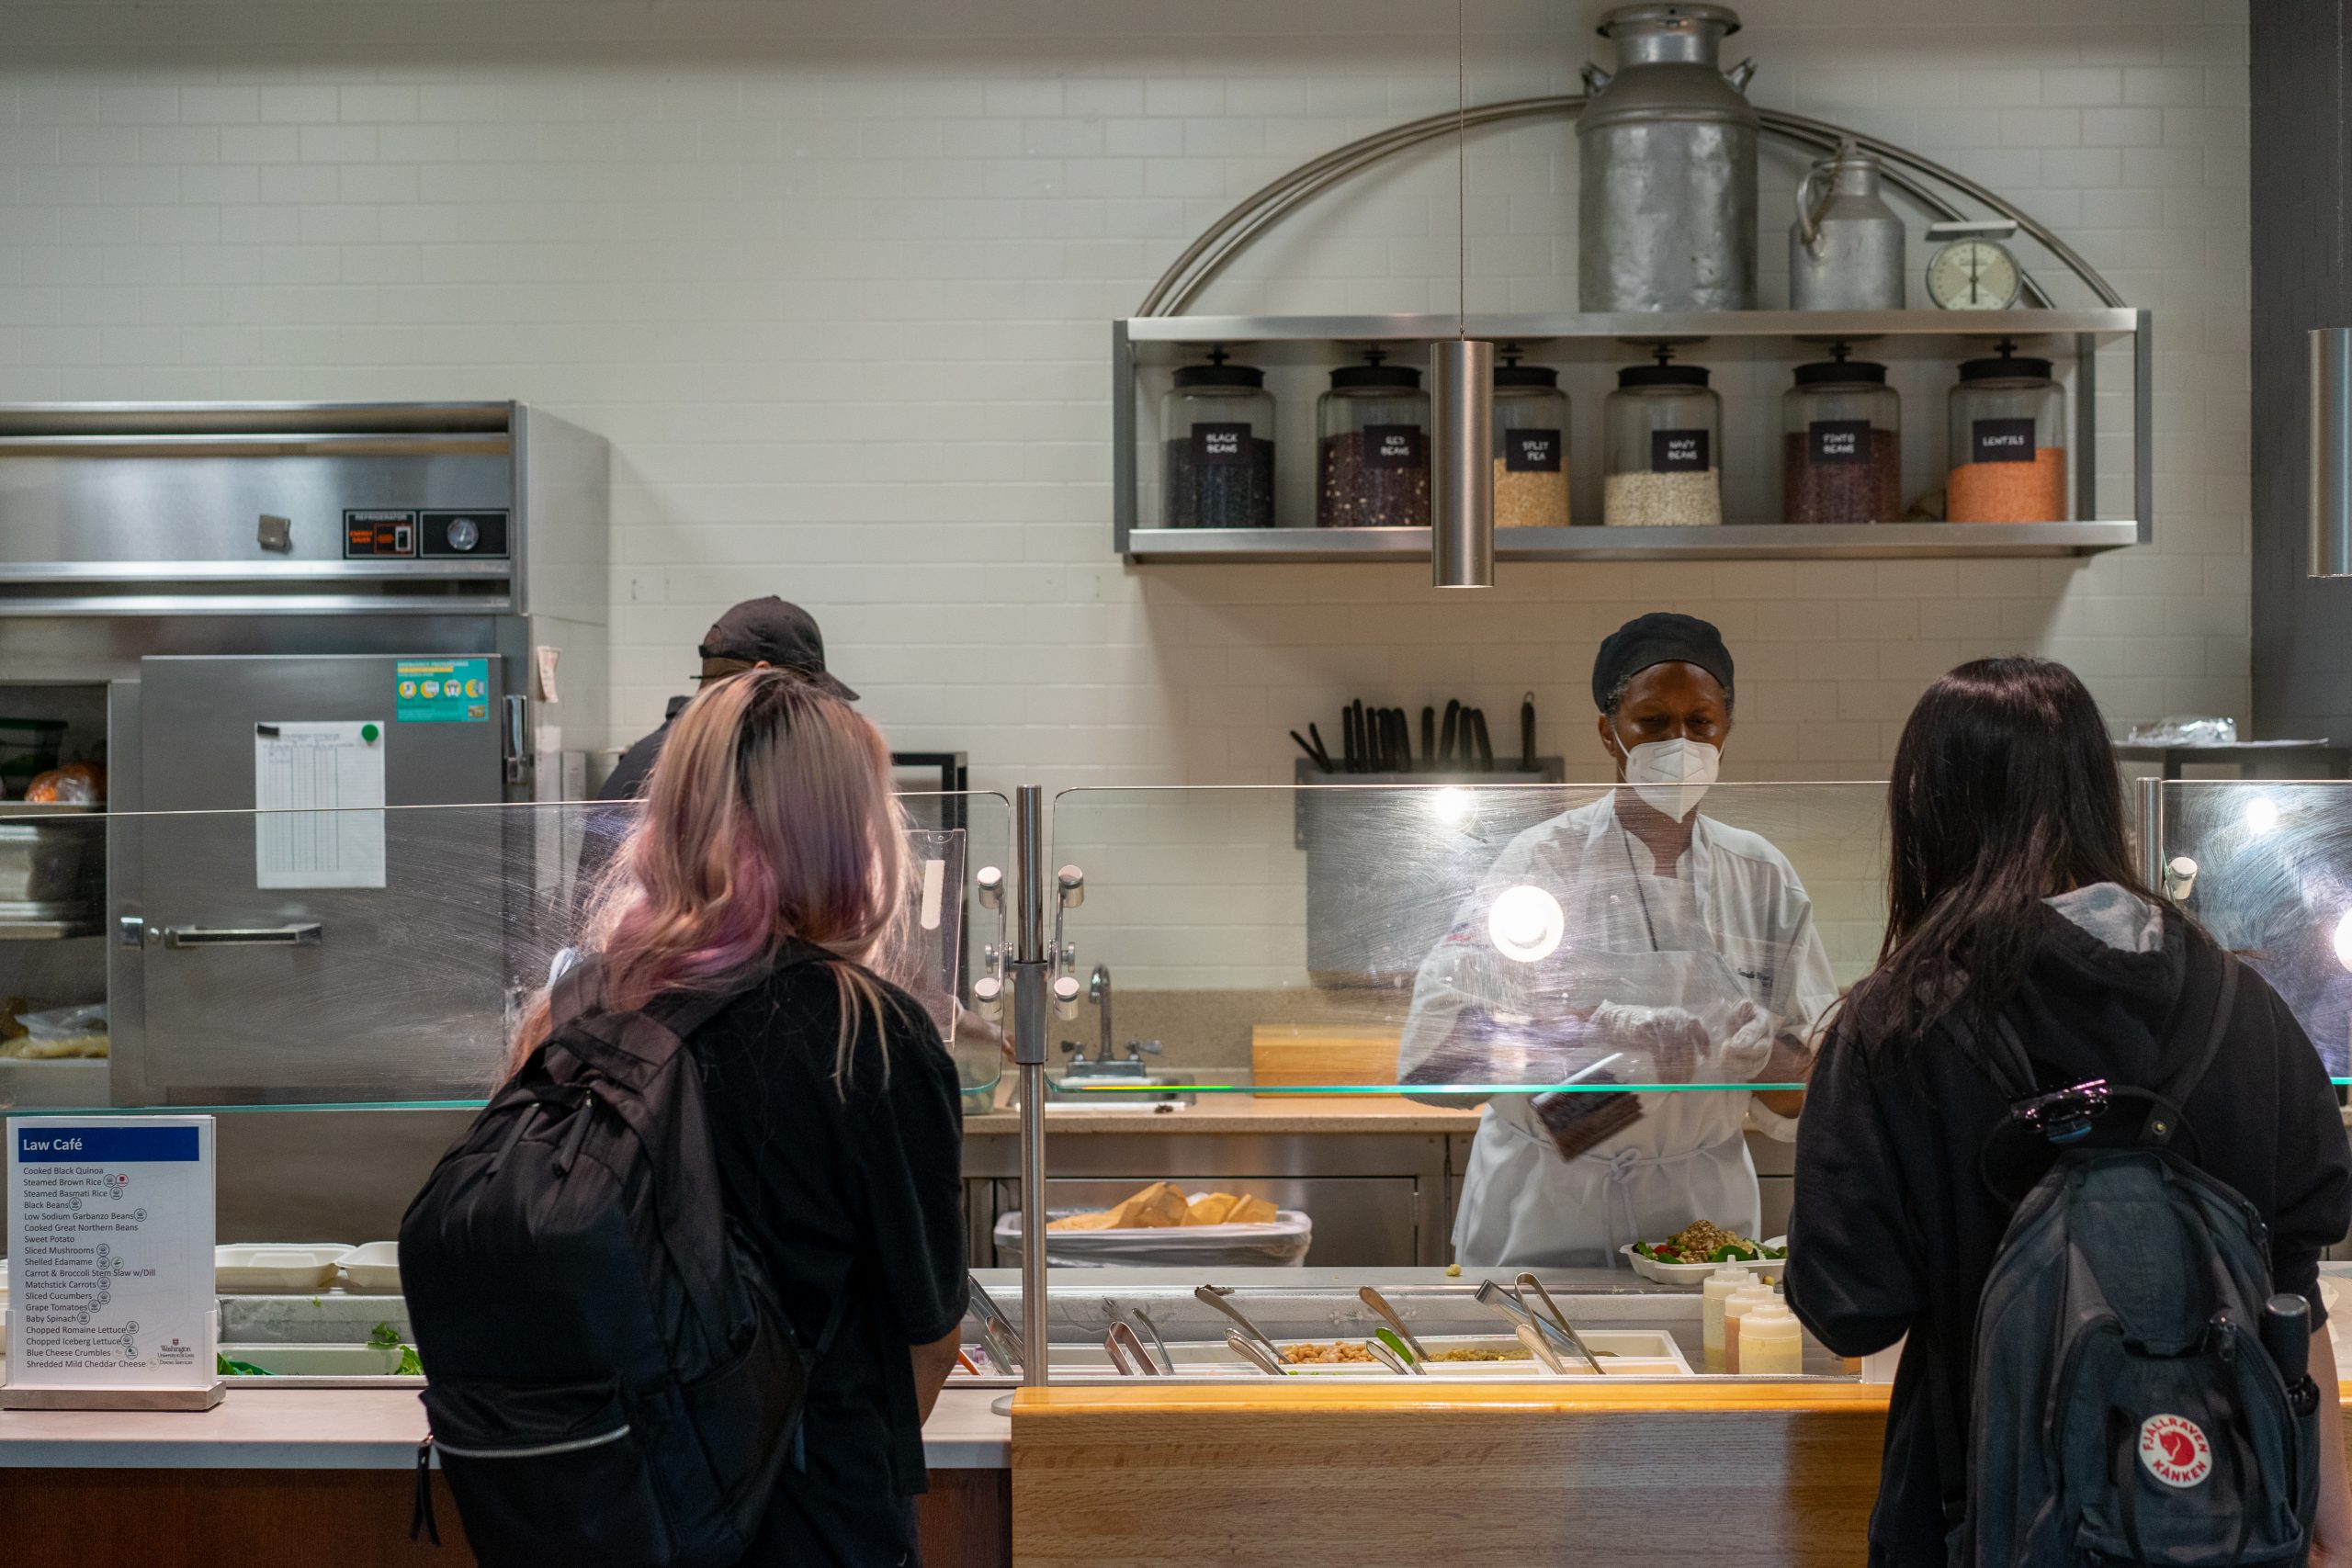 Two students carrying backpacks stand across a counter from a chef.